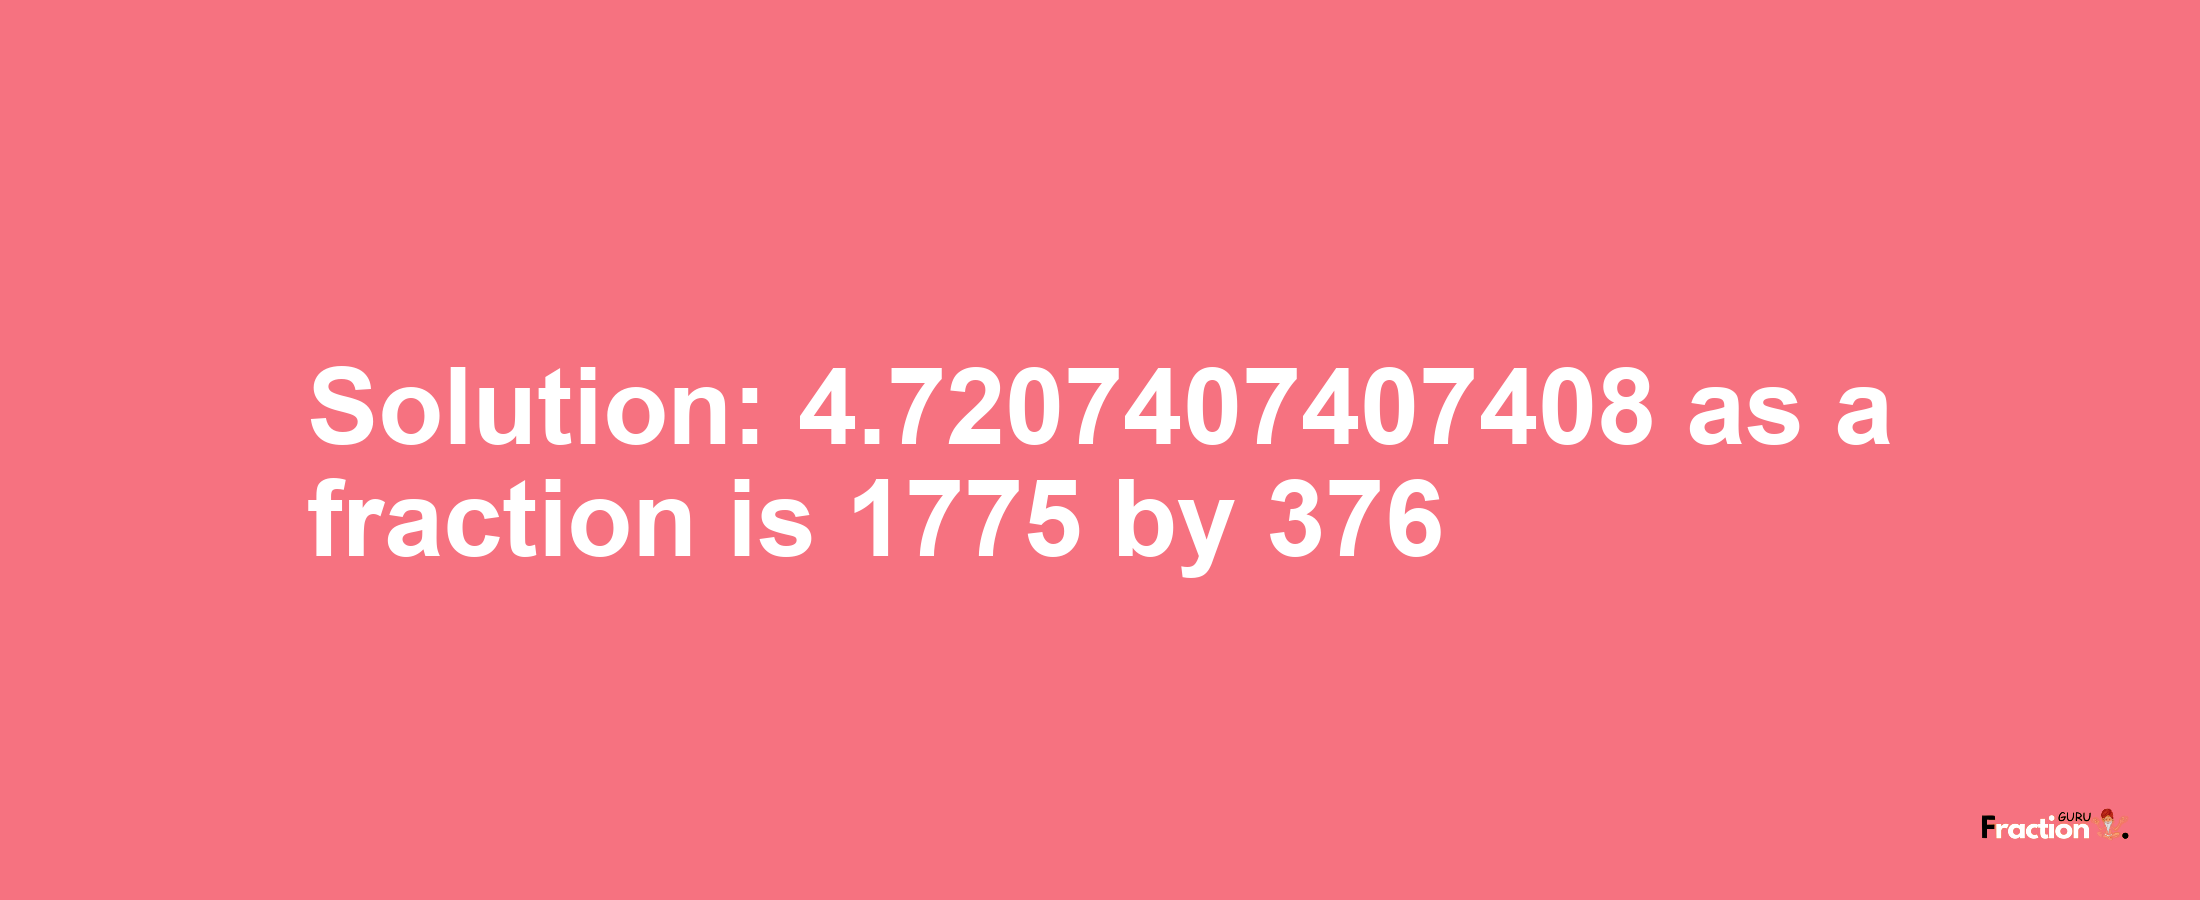 Solution:4.7207407407408 as a fraction is 1775/376